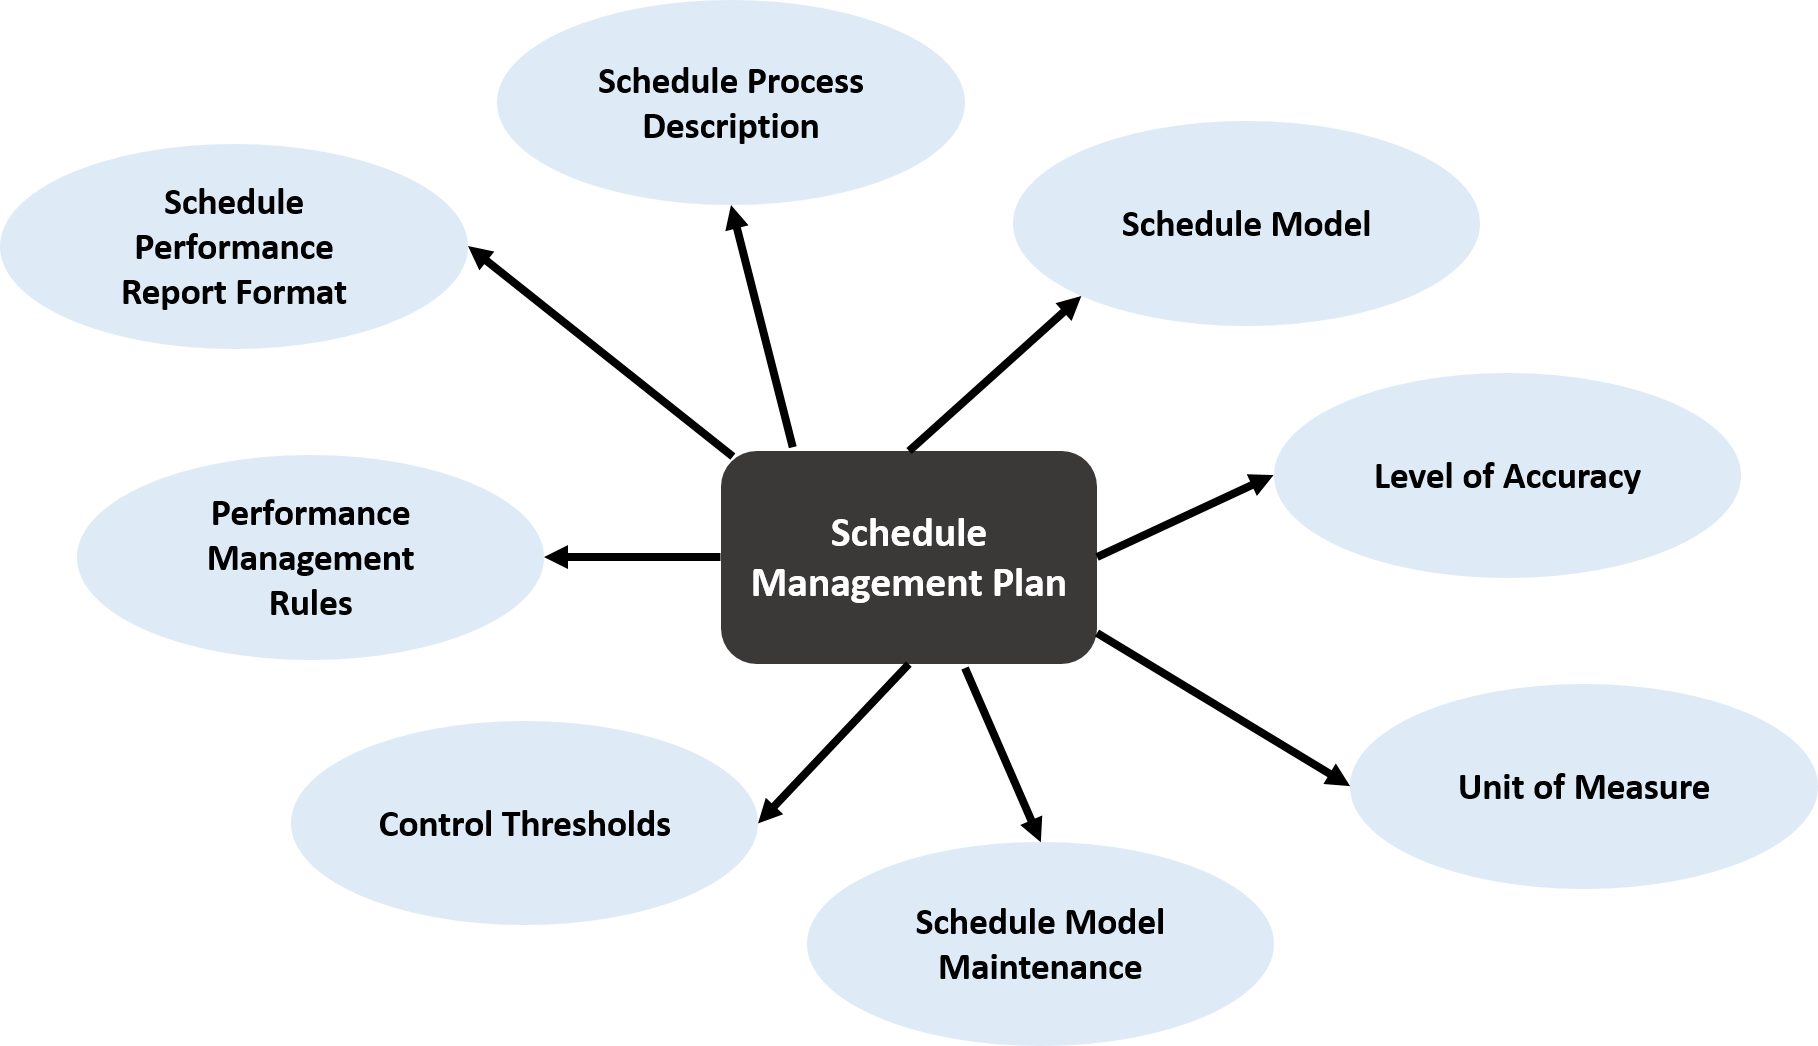 schedule management plan - invensis learning